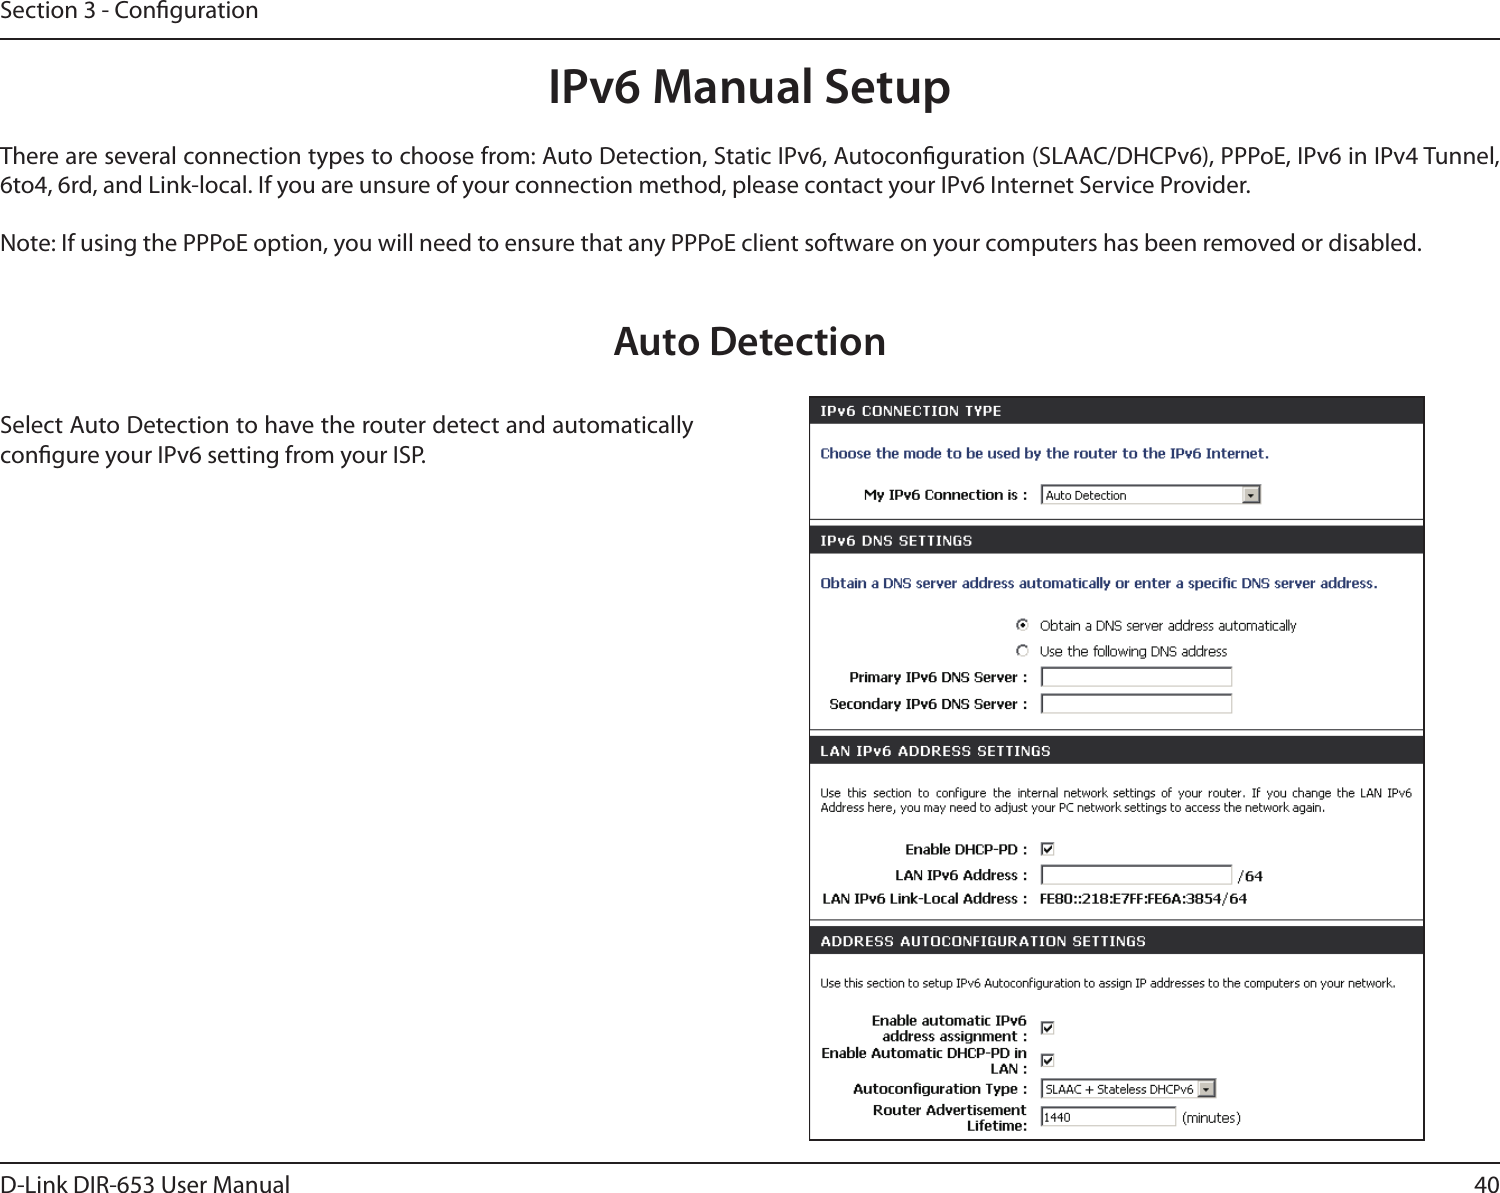 40D-Link DIR-653 User ManualSection 3 - CongurationIPv6 Manual SetupThere are several connection types to choose from: Auto Detection, Static IPv6, Autoconguration (SLAAC/DHCPv6), PPPoE, IPv6 in IPv4 Tunnel, 6to4, 6rd, and Link-local. If you are unsure of your connection method, please contact your IPv6 Internet Service Provider. Note: If using the PPPoE option, you will need to ensure that any PPPoE client software on your computers has been removed or disabled.Auto DetectionSelect Auto Detection to have the router detect and automatically congure your IPv6 setting from your ISP.